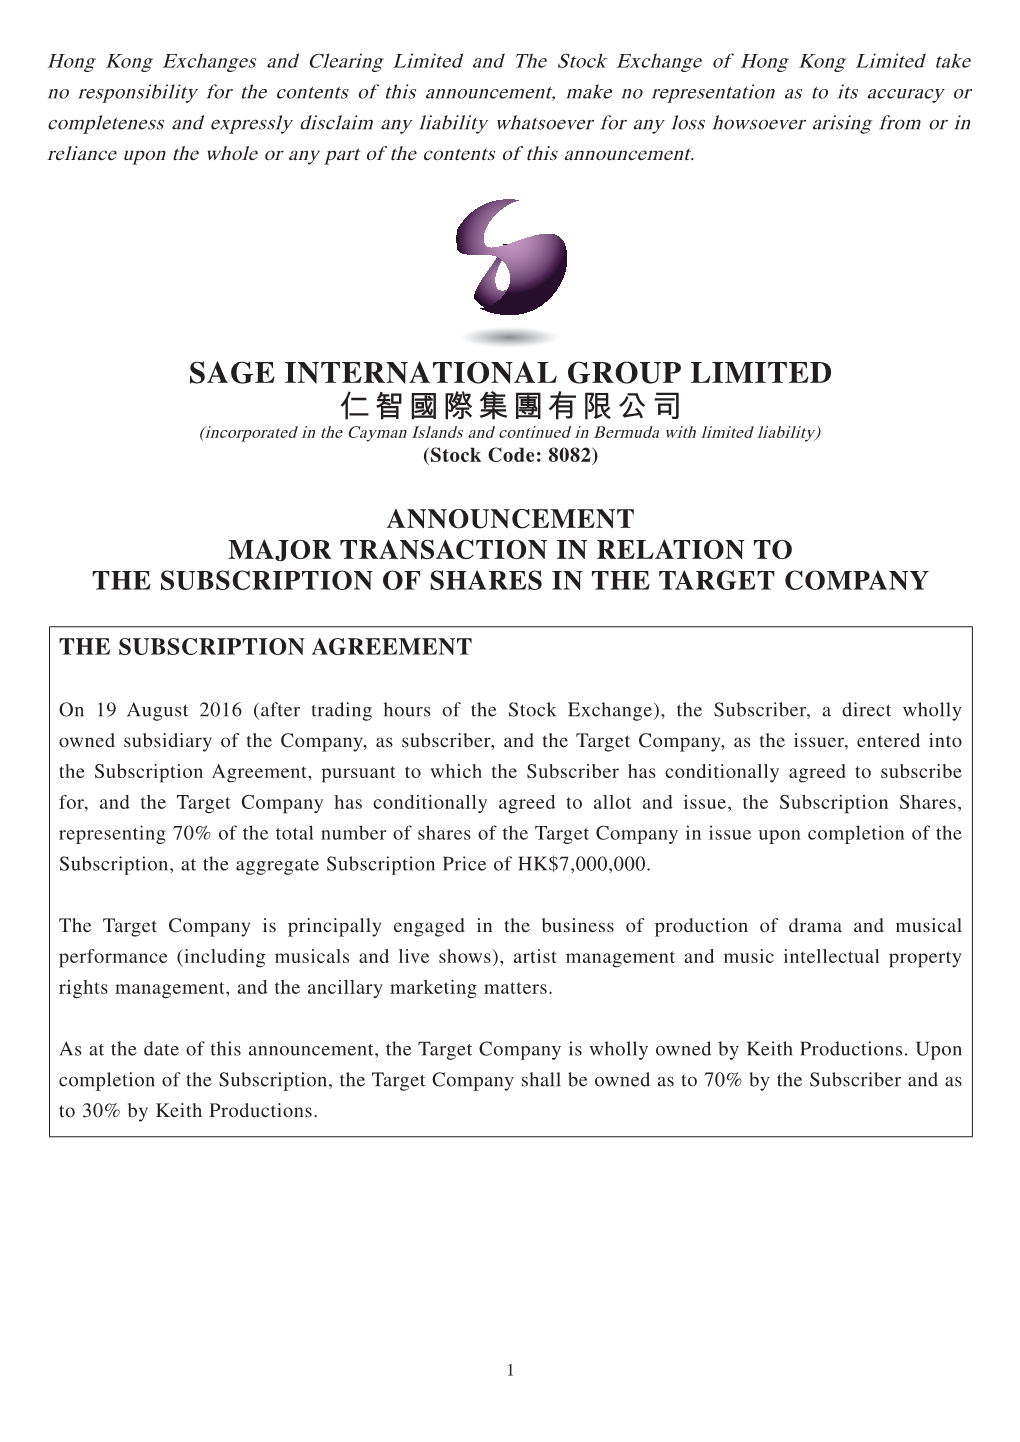 SAGE INTERNATIONAL GROUP LIMITED 仁智國際集團有限公司 (Incorporated in the Cayman Islands and Continued in Bermuda with Limited Liability) (Stock Code: 8082)